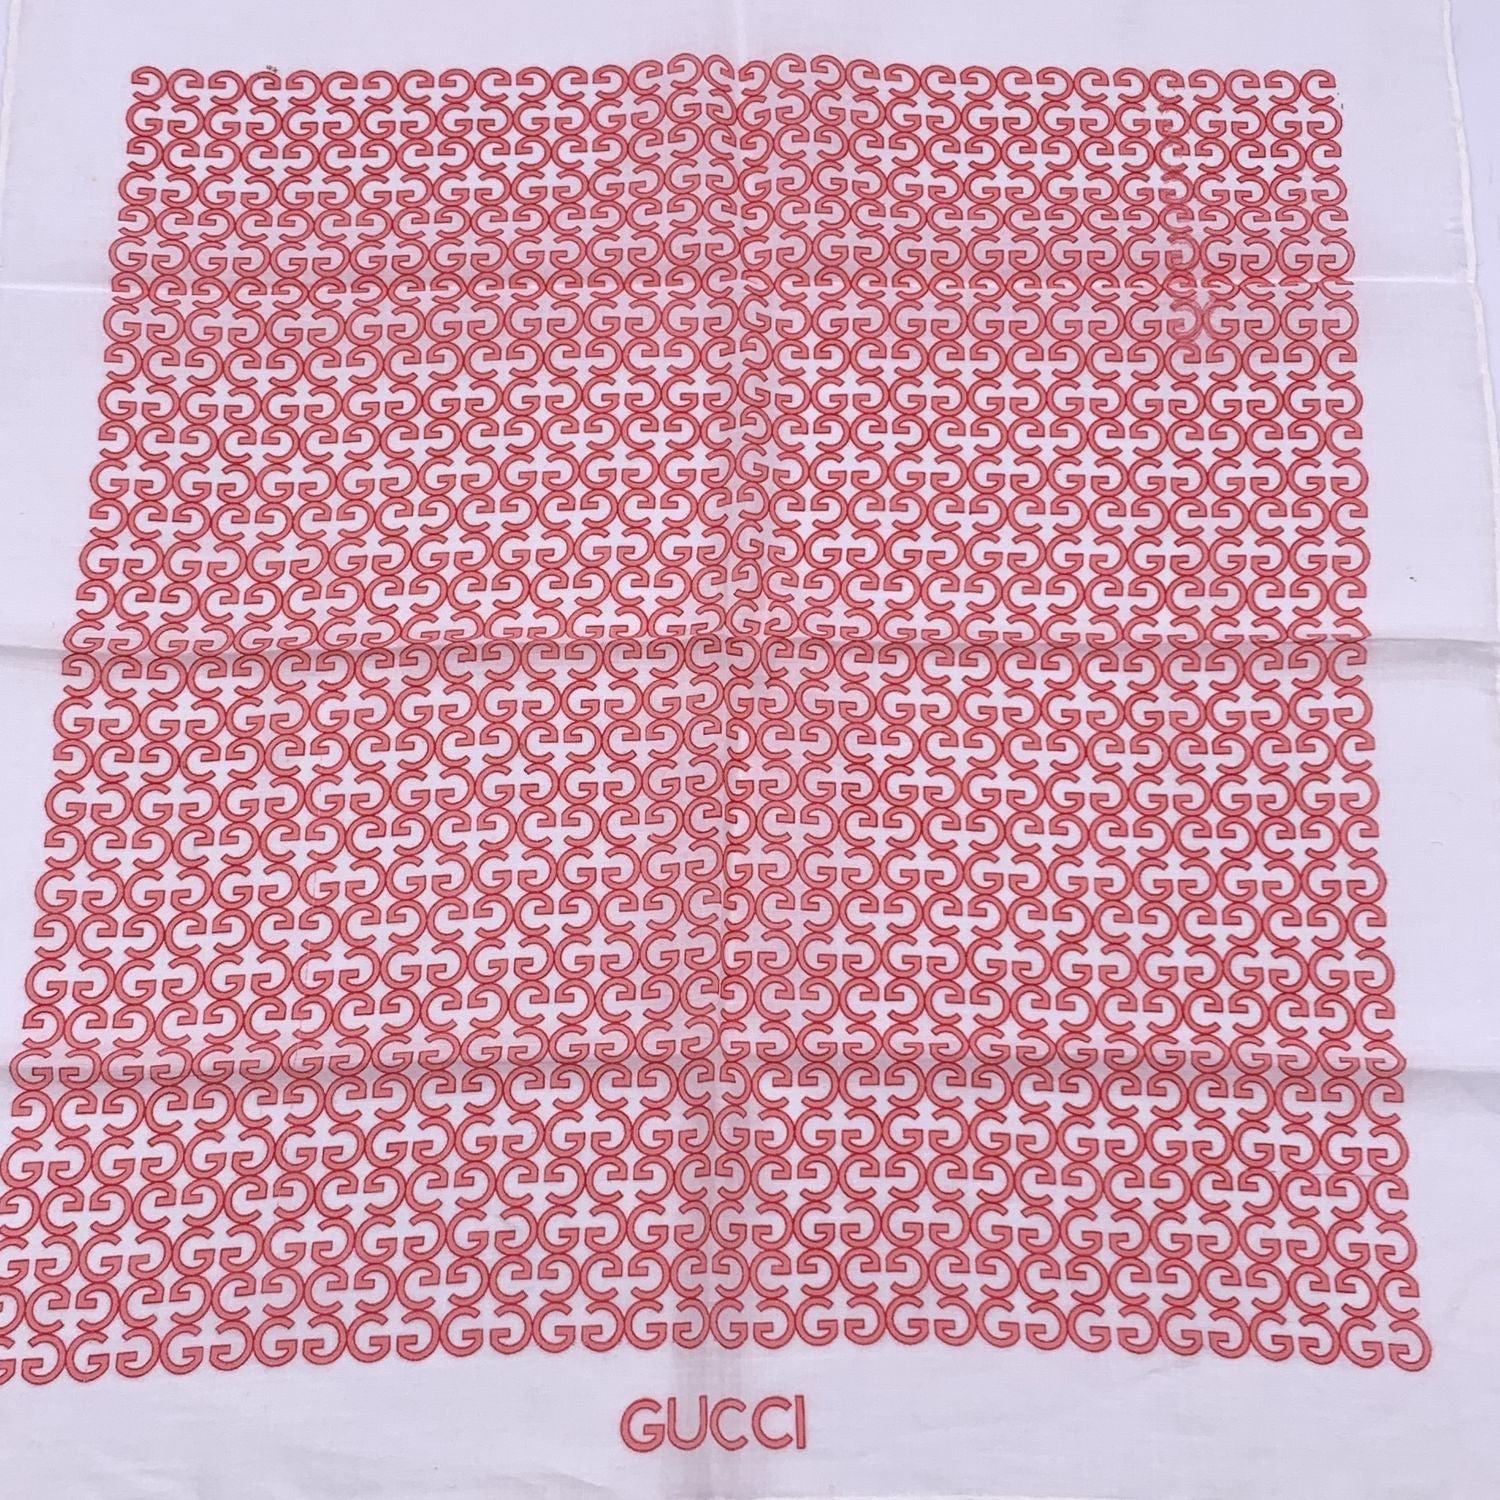 Vintage neck scarf by GUCCI. 100% Cotton. Pink GG logo pattern with white borders. 'Gucci' signature printed on the lower center border. Approx. Measurements: 16.5 x 17 inches - 41.9 x 43.2 cm Details MATERIAL: Cotton COLOR: Pink MODEL: n.a. GENDER: